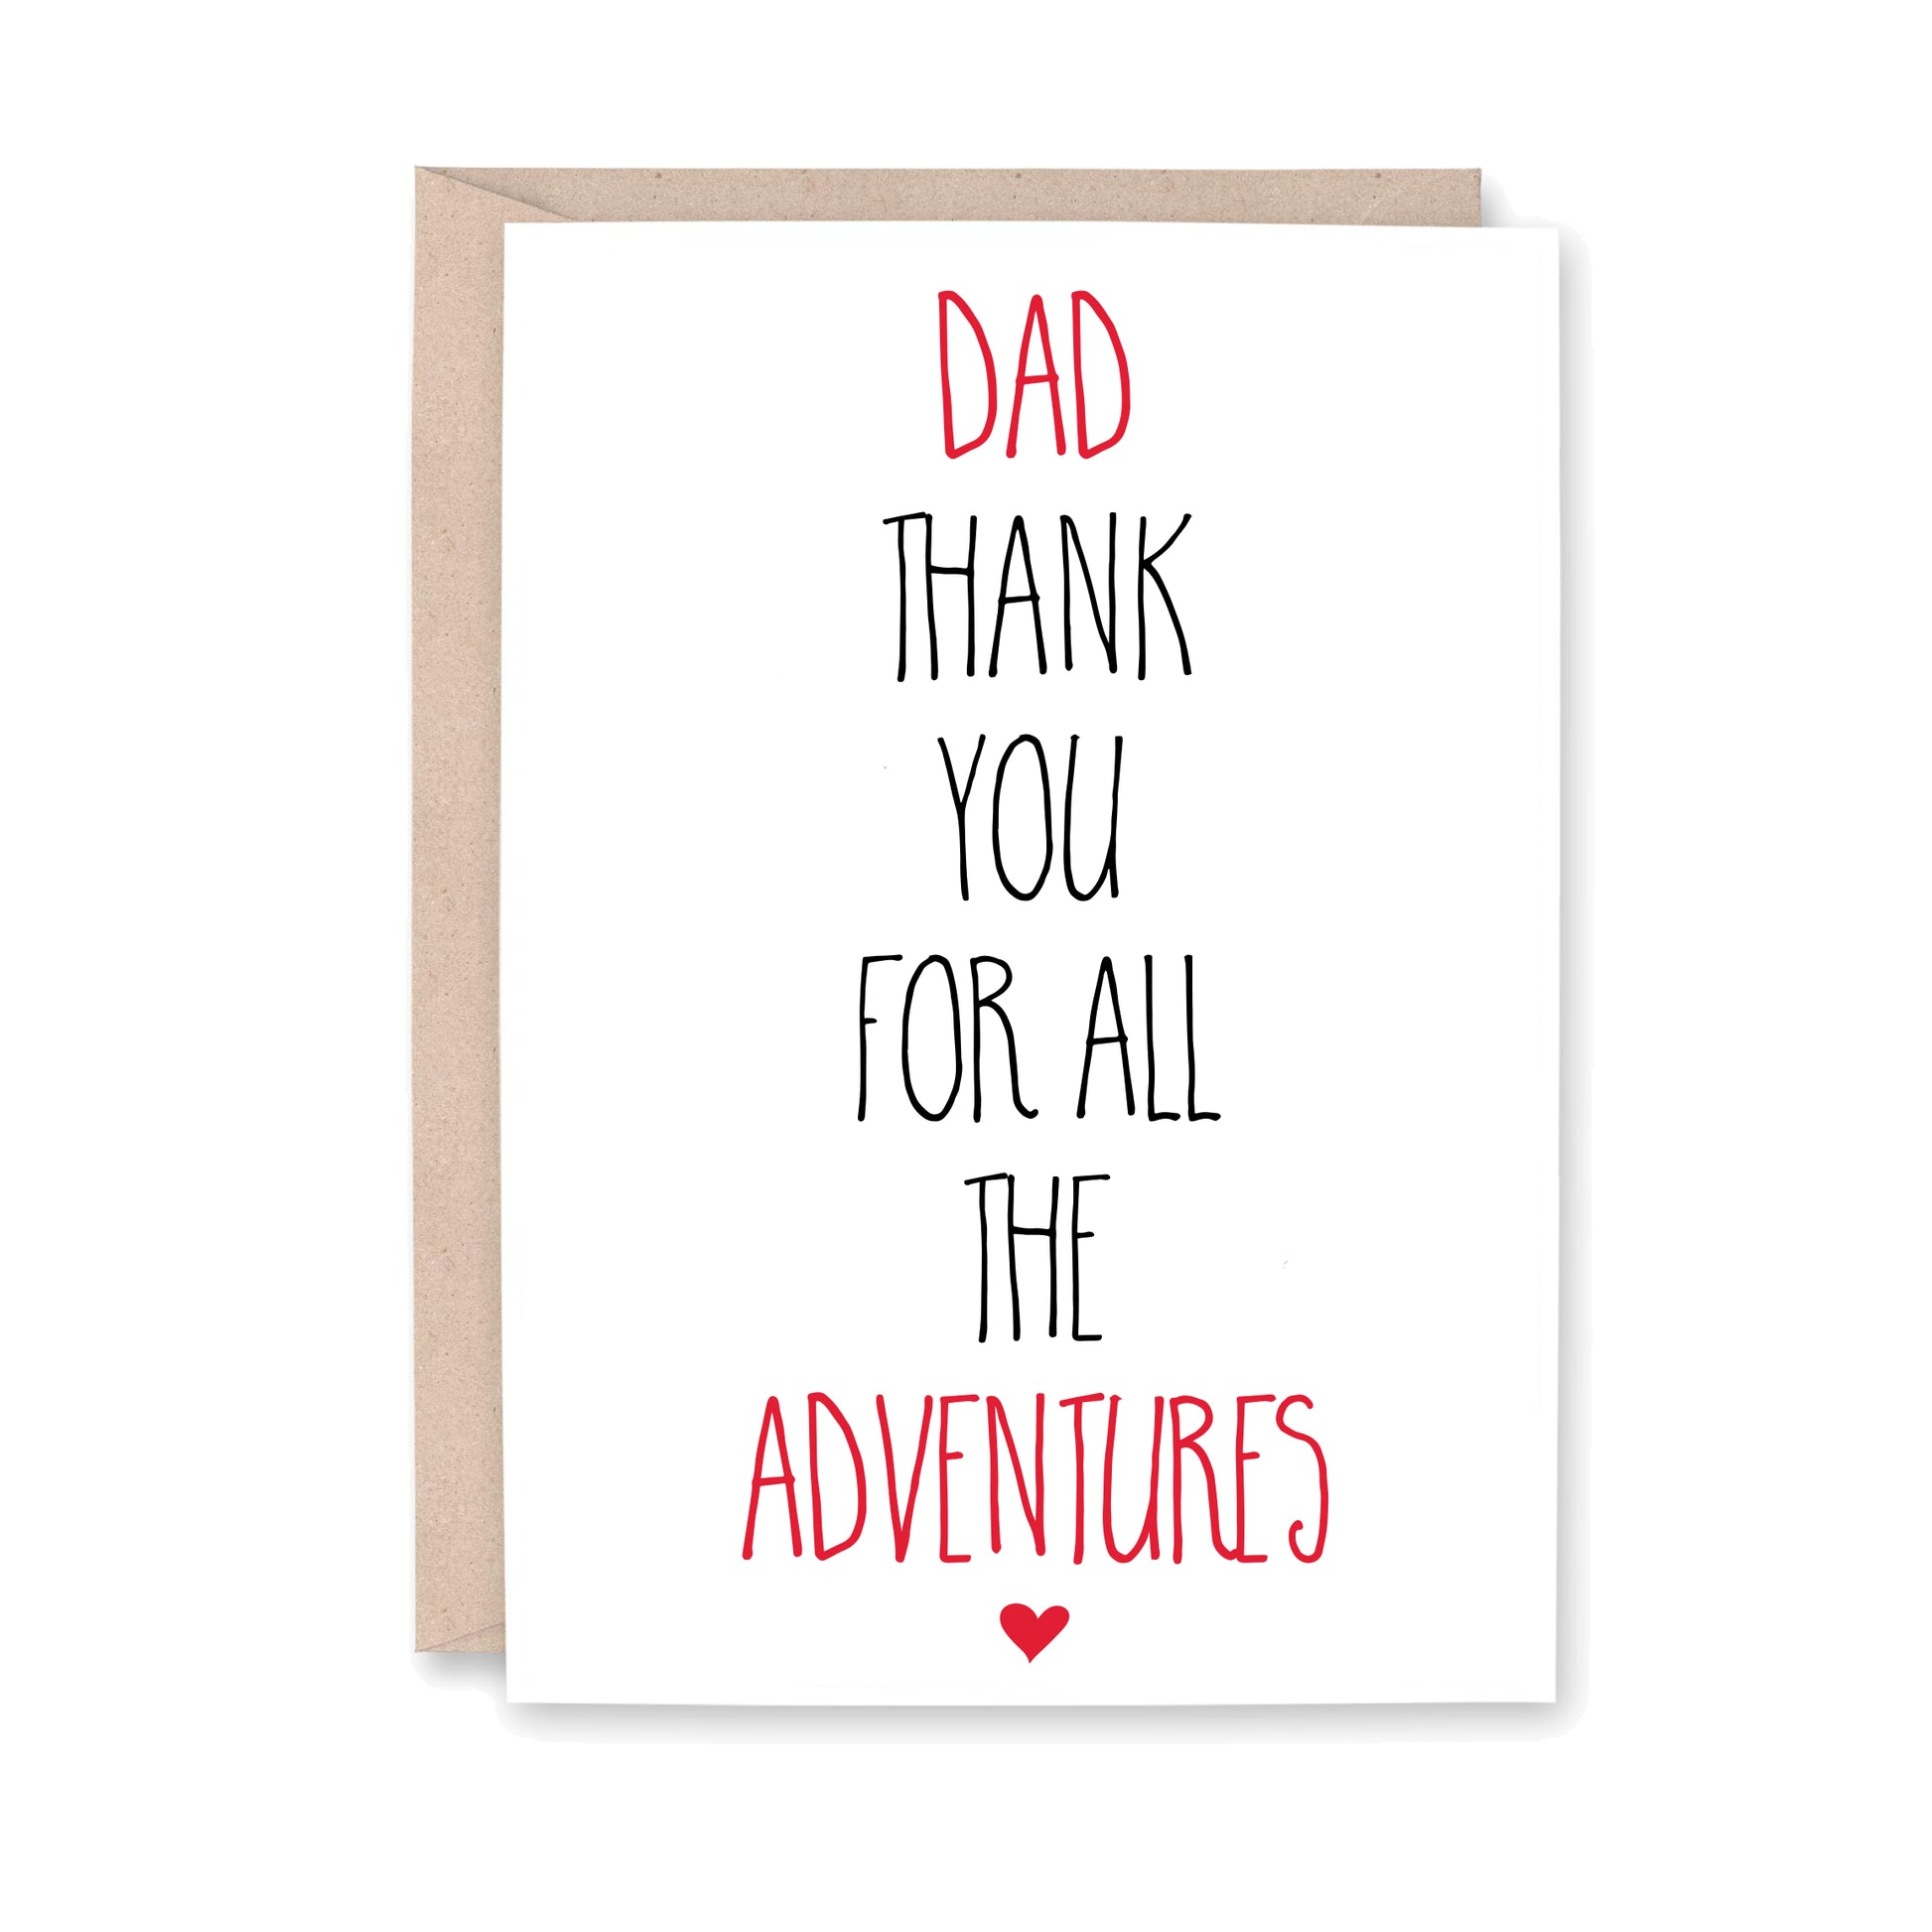 Dad Thank You for All the Adventures